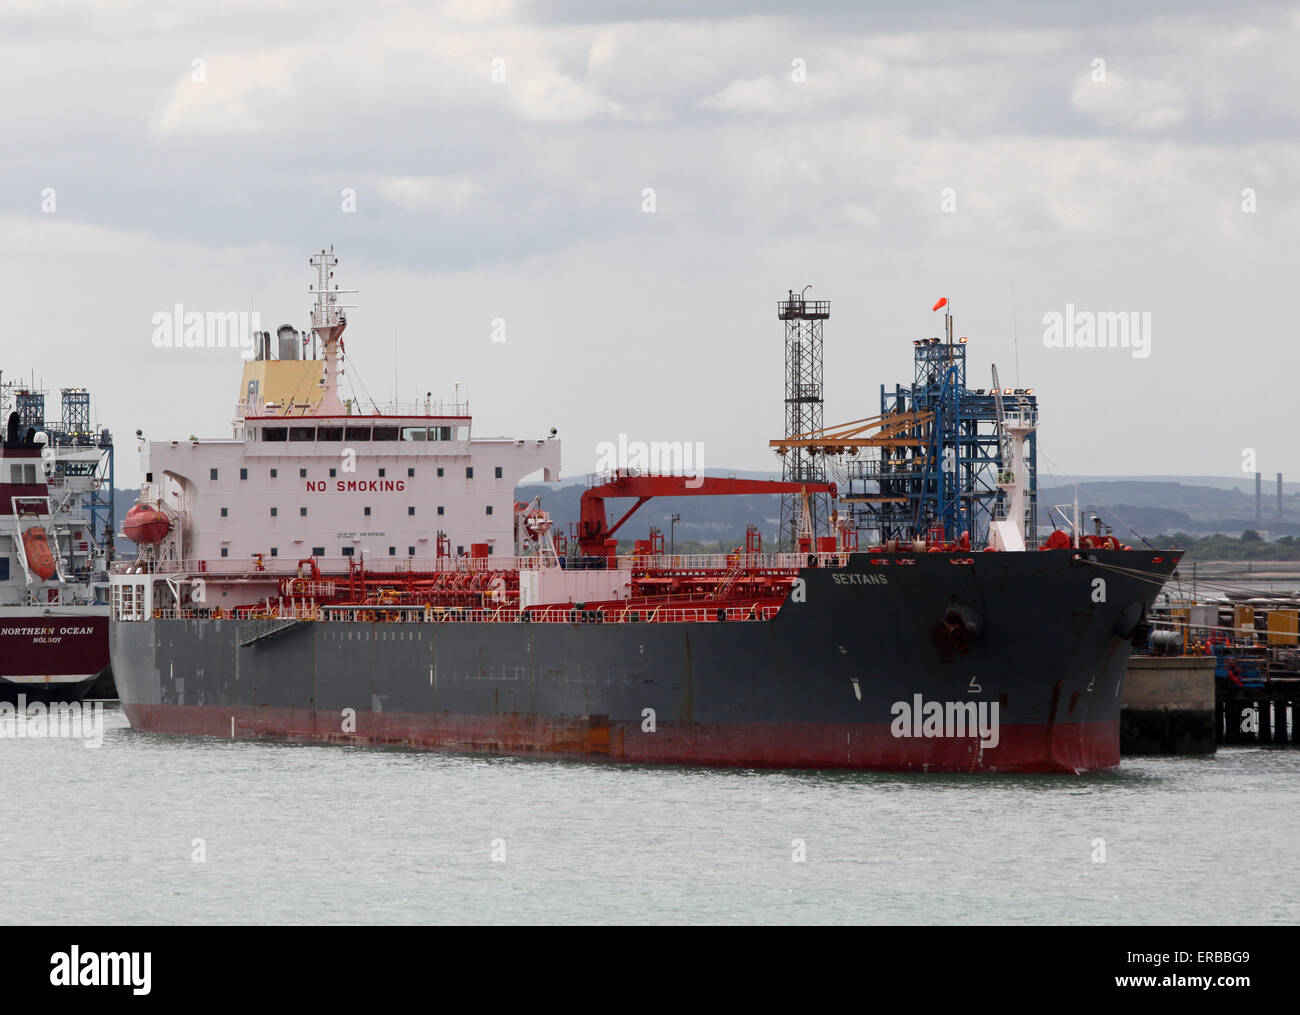 Sextans oil chemical tanker ship pictured at Fawley Refinery near Southampton Stock Photo